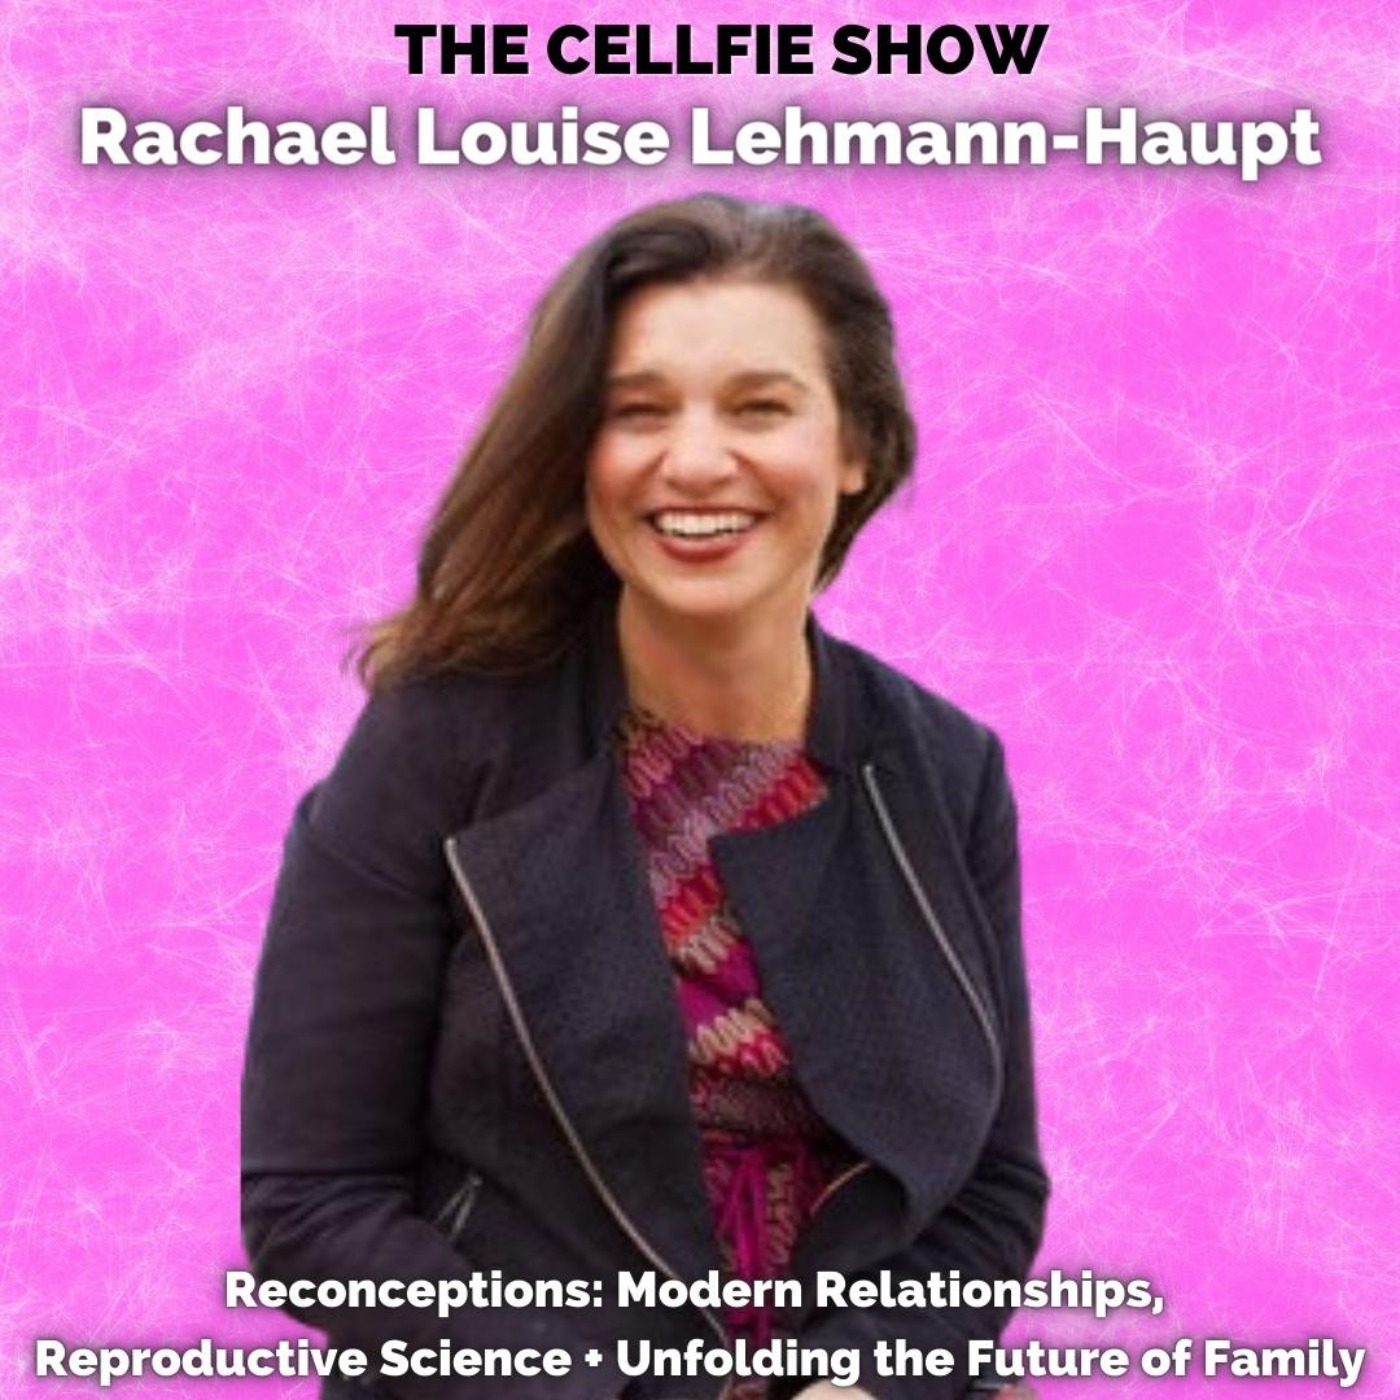 Single Motherhood by Choice. Modern Relationships. Reproductive Science. Unfolding the Future of Family with Rachael Louise Lehmann-Haupt